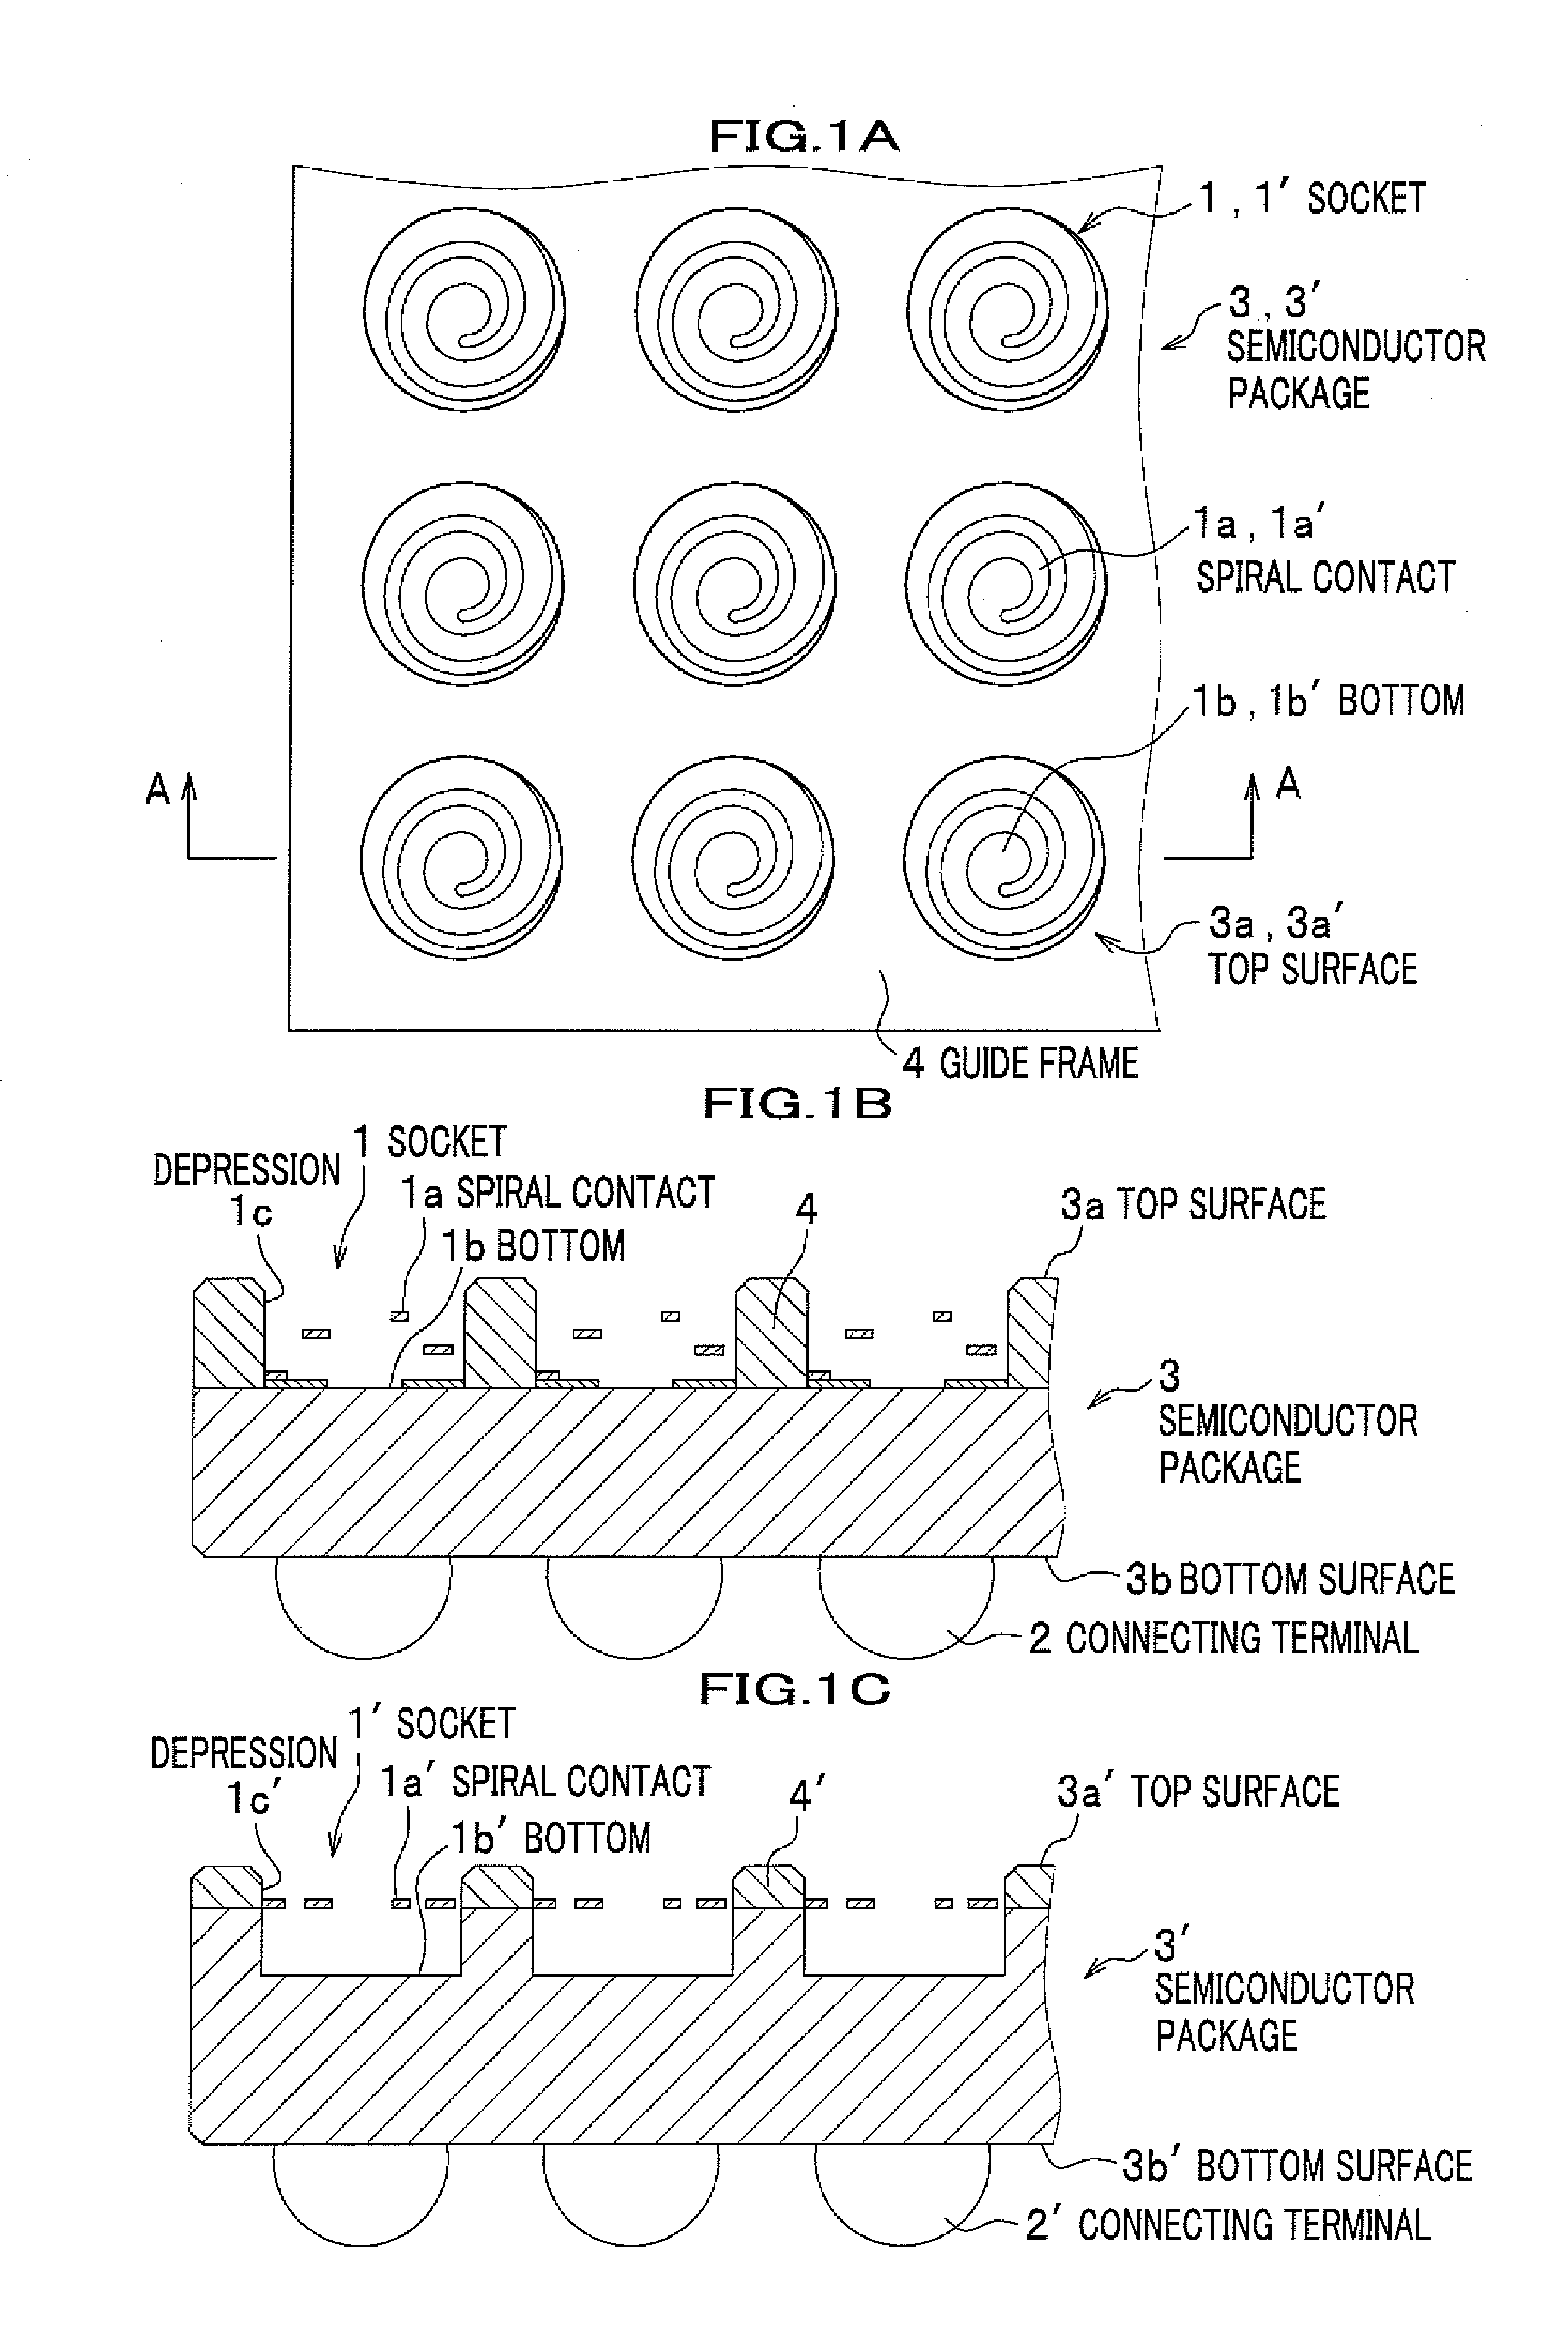 Semiconductor Package Having Socket Function, Semiconductor Module, Electronic Circuit Module and Circuit Board with Socket